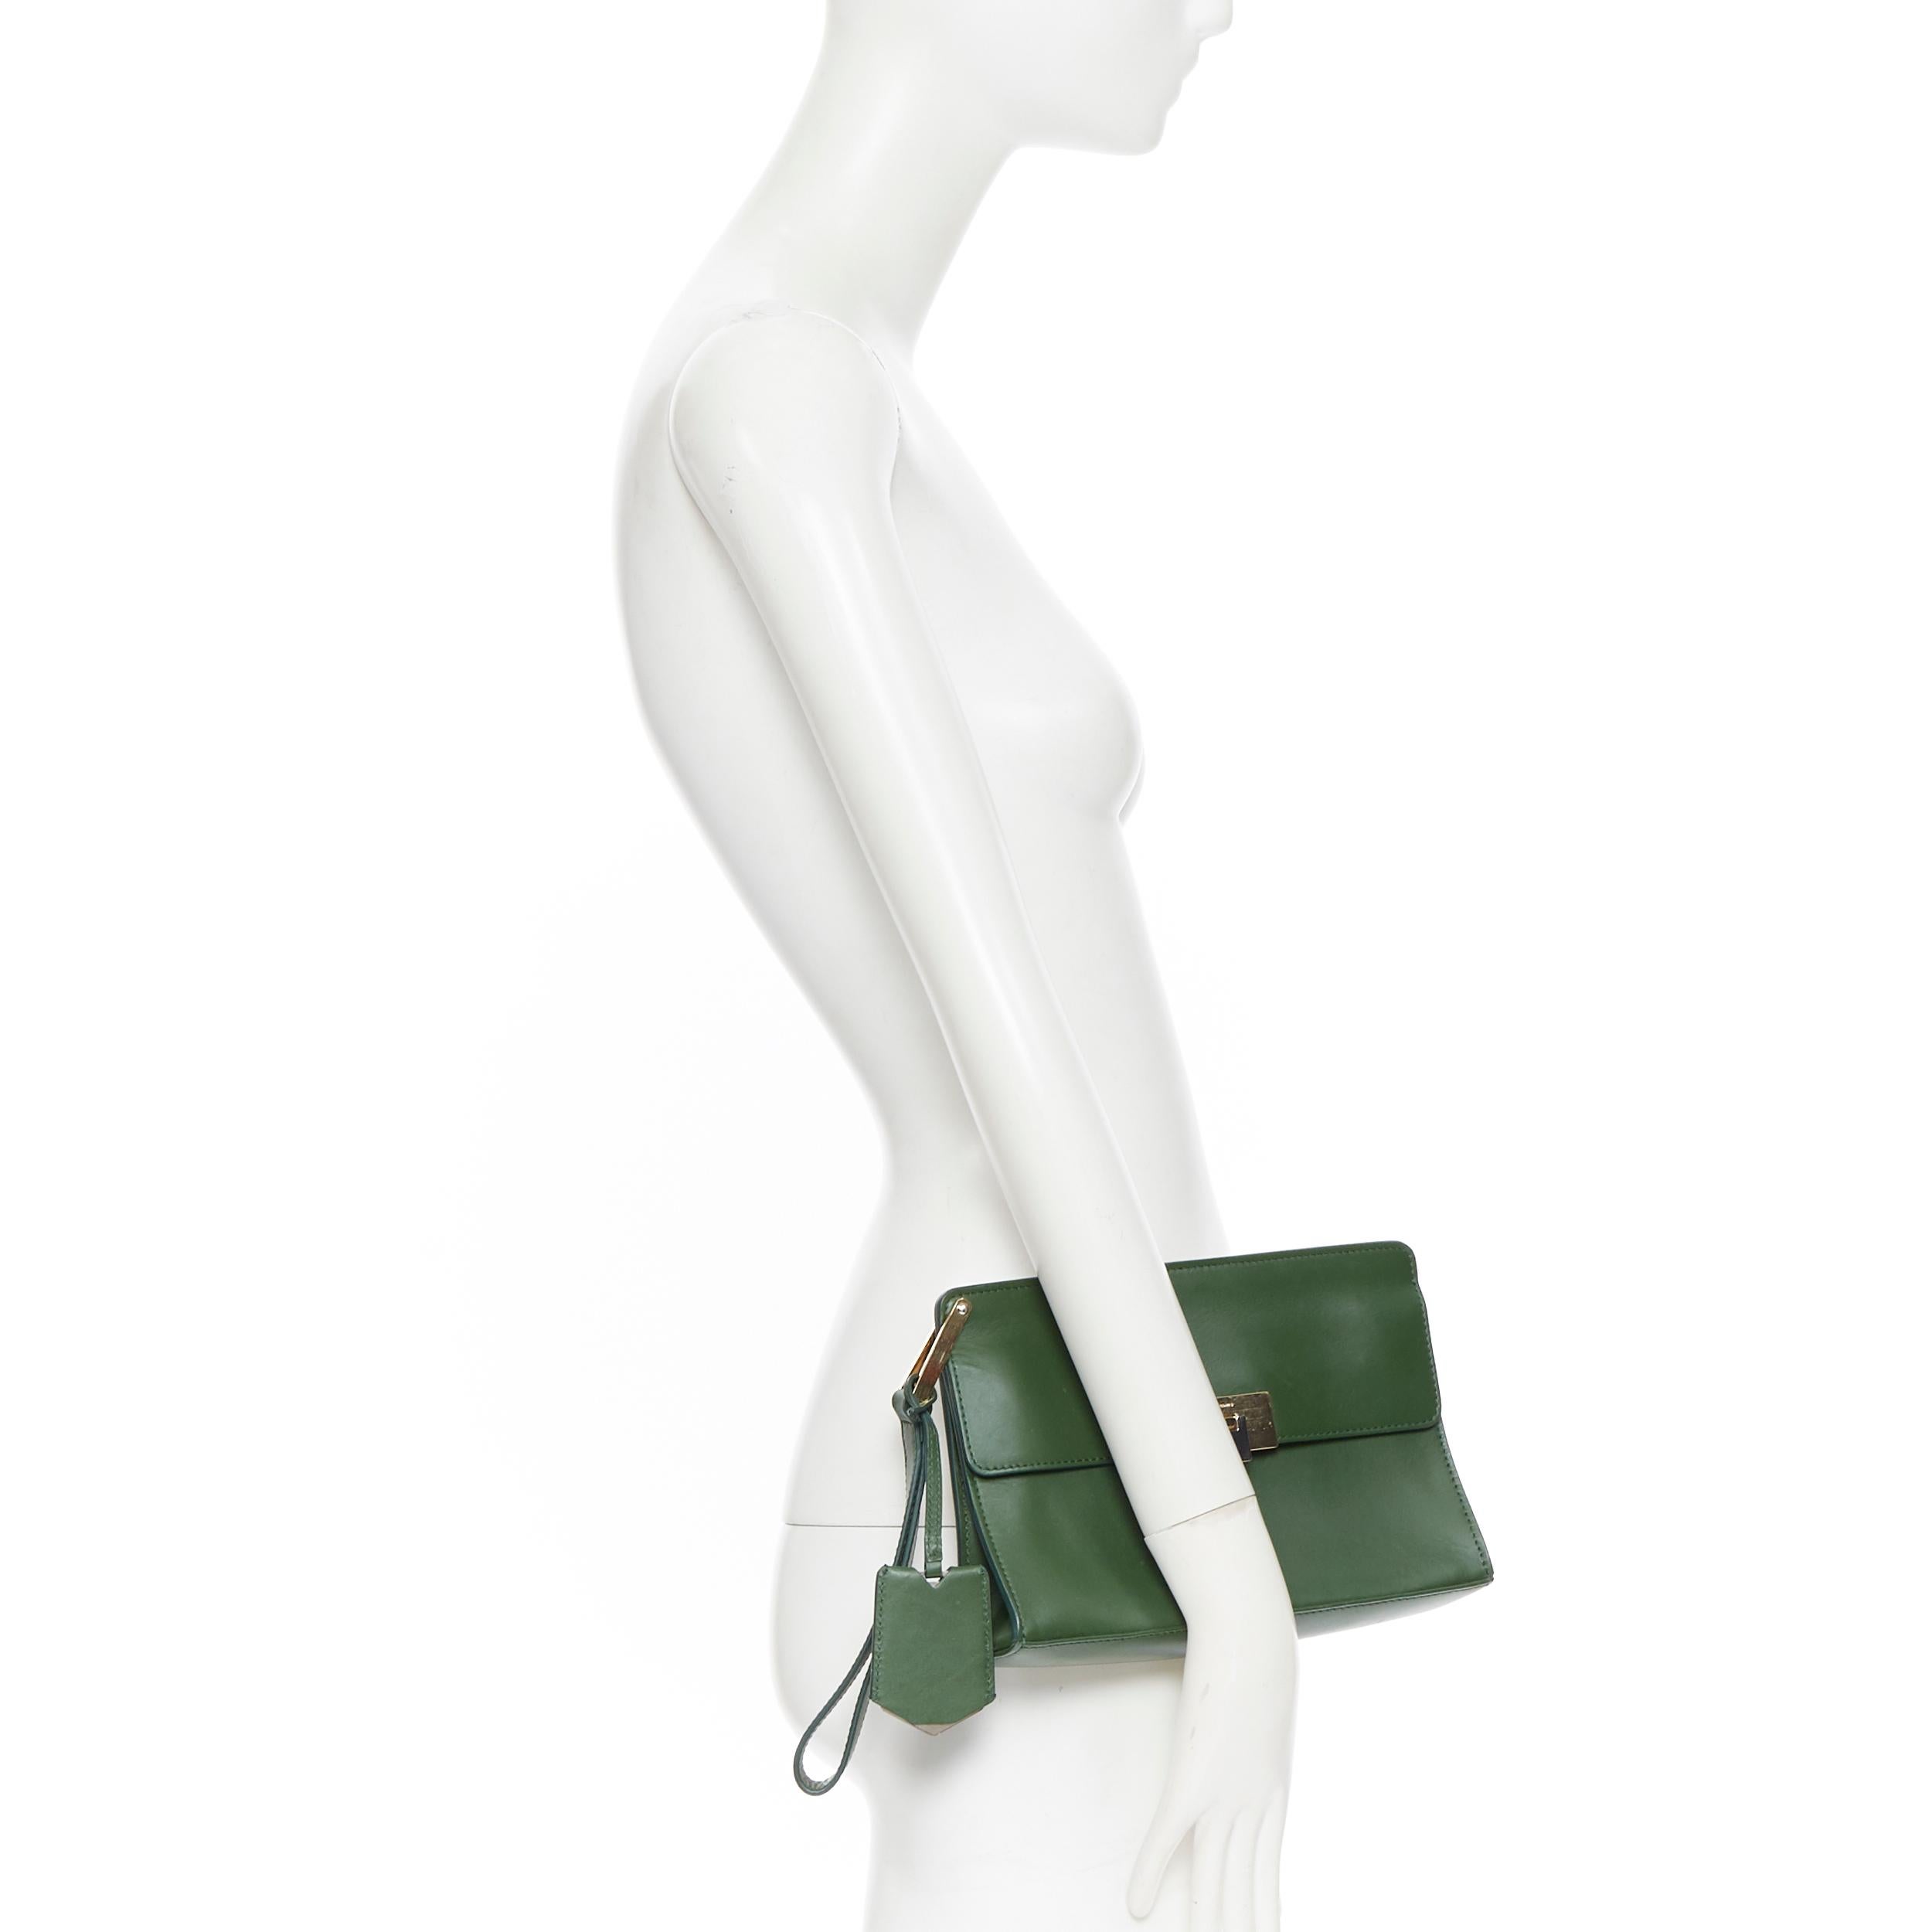 BALENCIAGA Le Dix Pochette geren leather mixed metal wristlet pocket clutch bag
Brand: Balenciaga
Model Name / Style: Le Dix
Material: Leather
Color: Green
Pattern: Solid
Closure: Clasp
Extra Detail: Green leather upper. Mixed gold and silver-tone